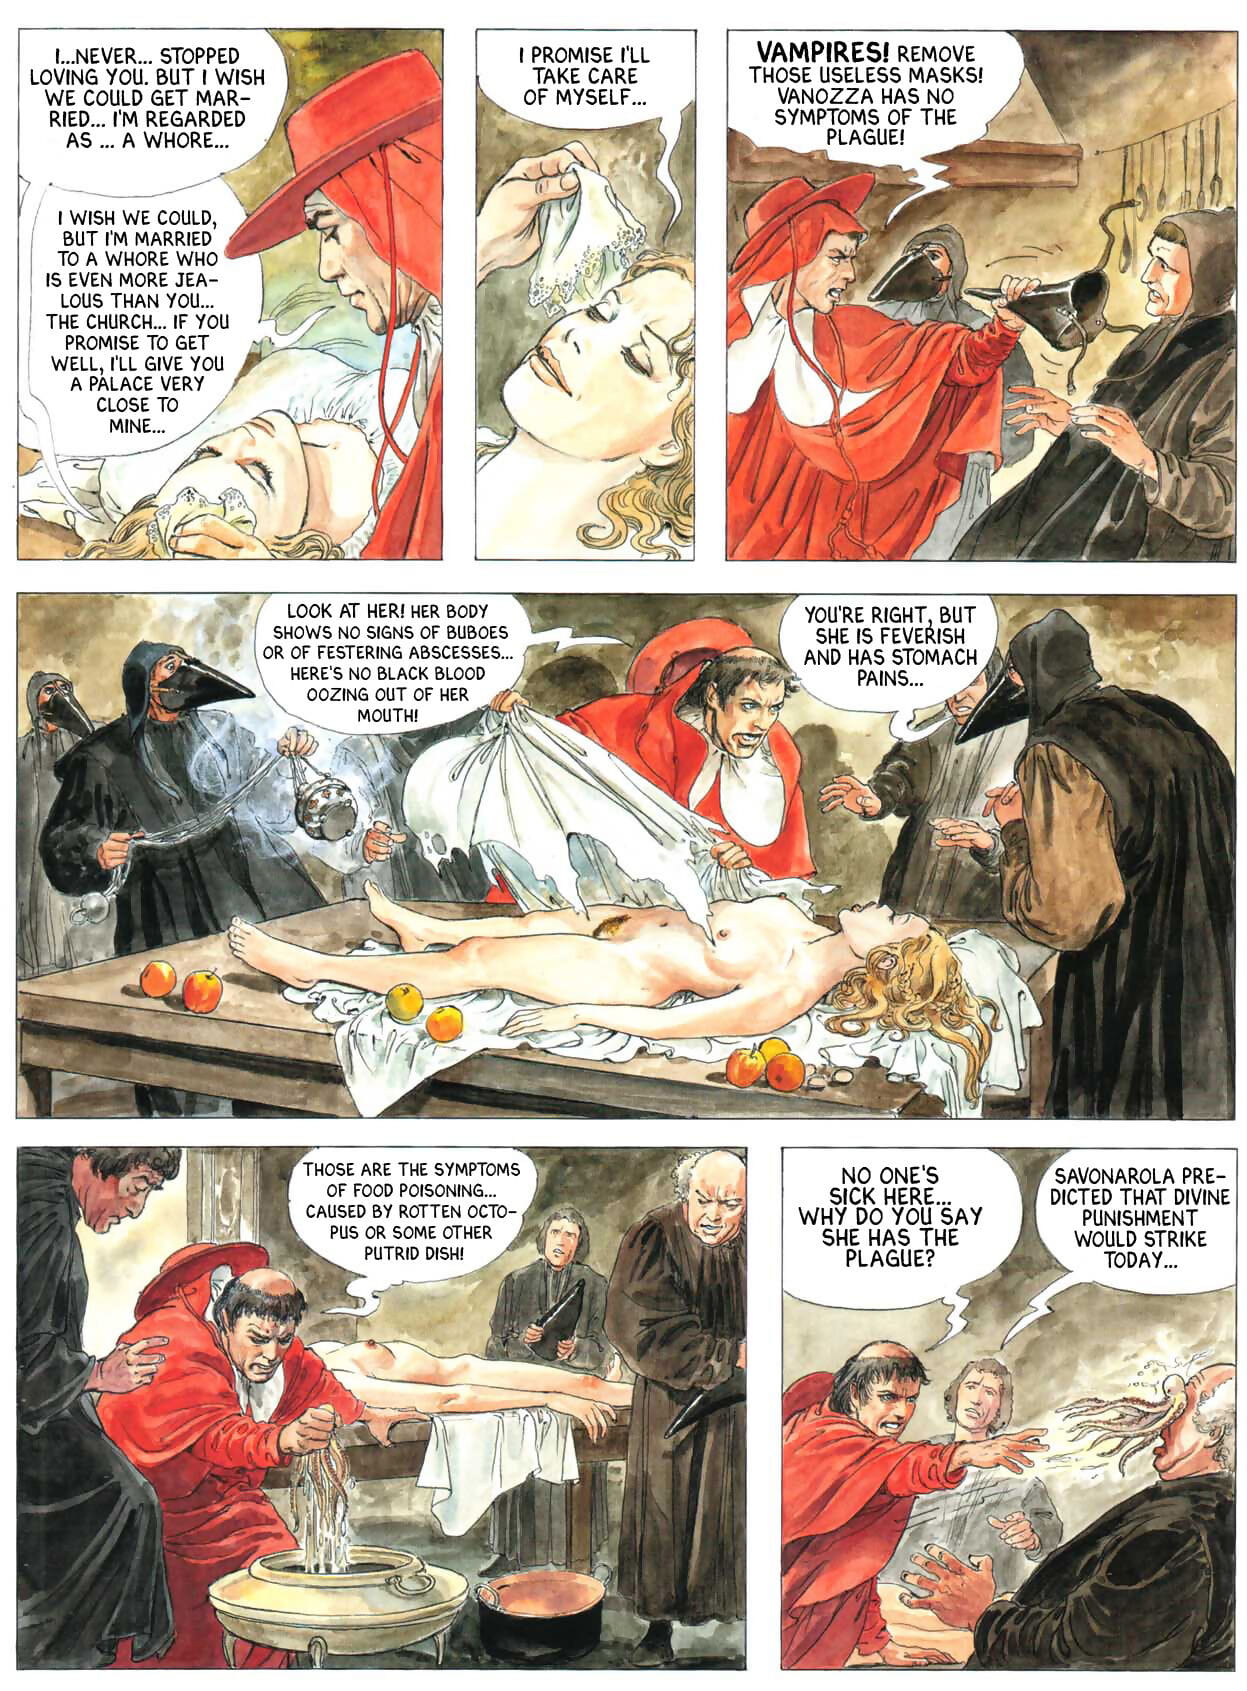 Borgia - Blood for the Pope page 1